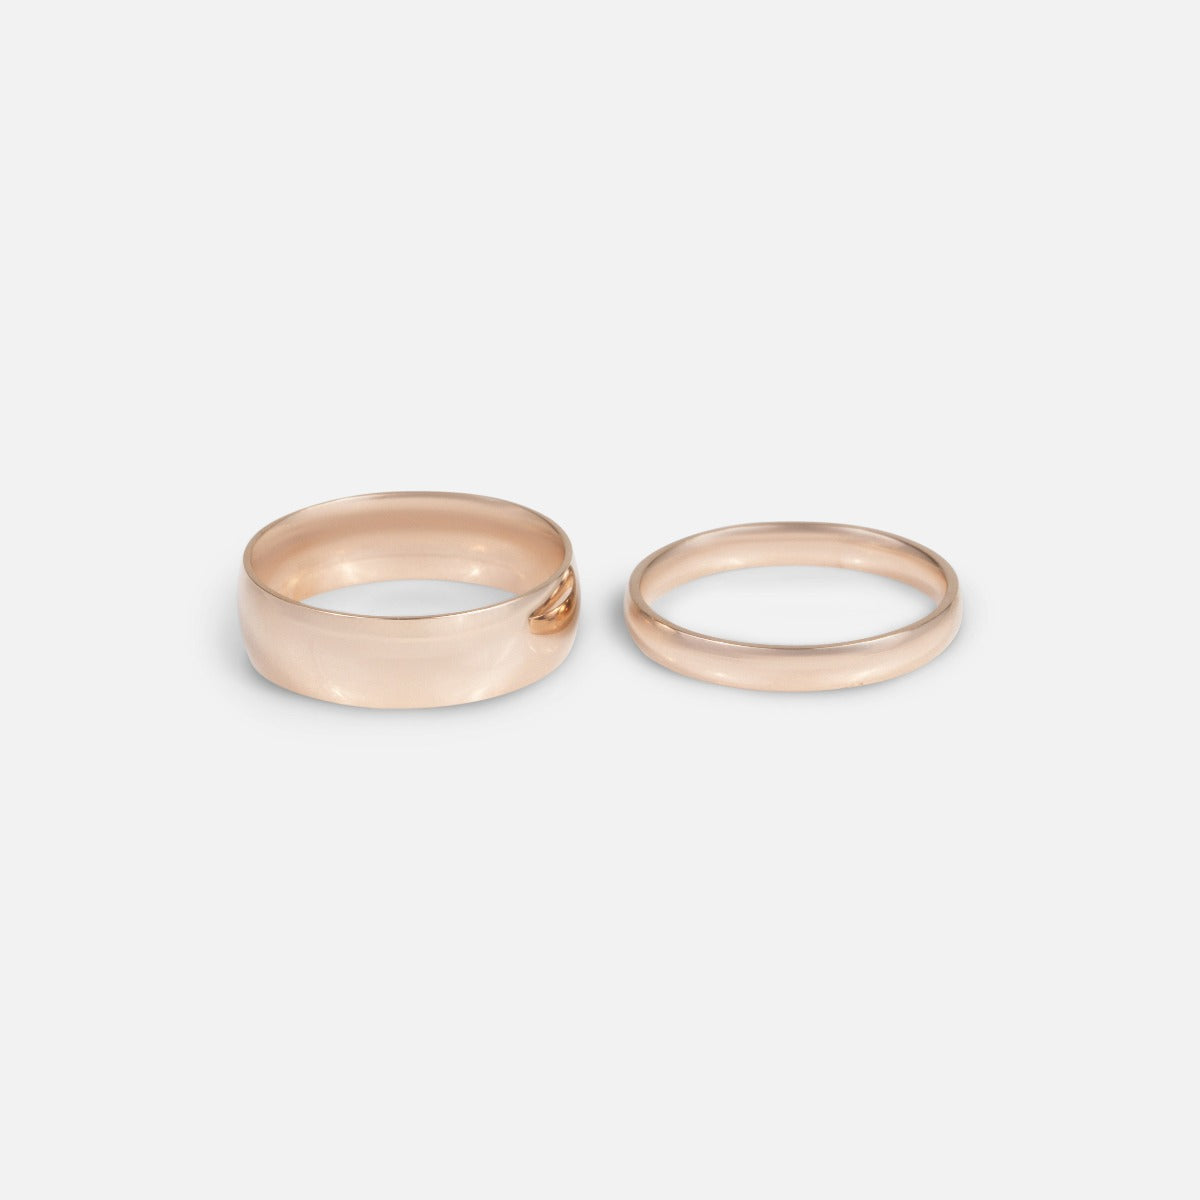 Set of rose gold stainless steel rings   